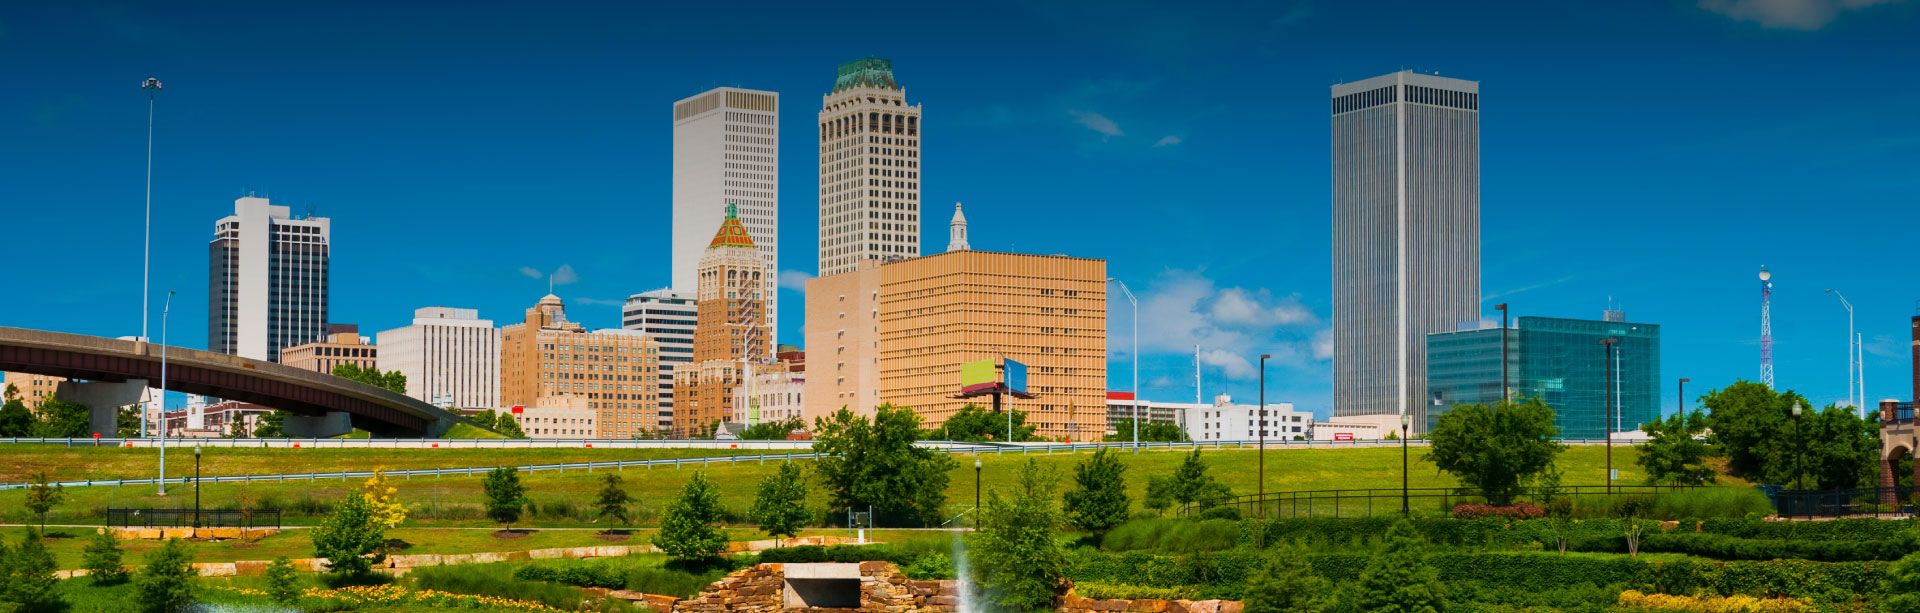 Payroll and HR Software in Tulsa/